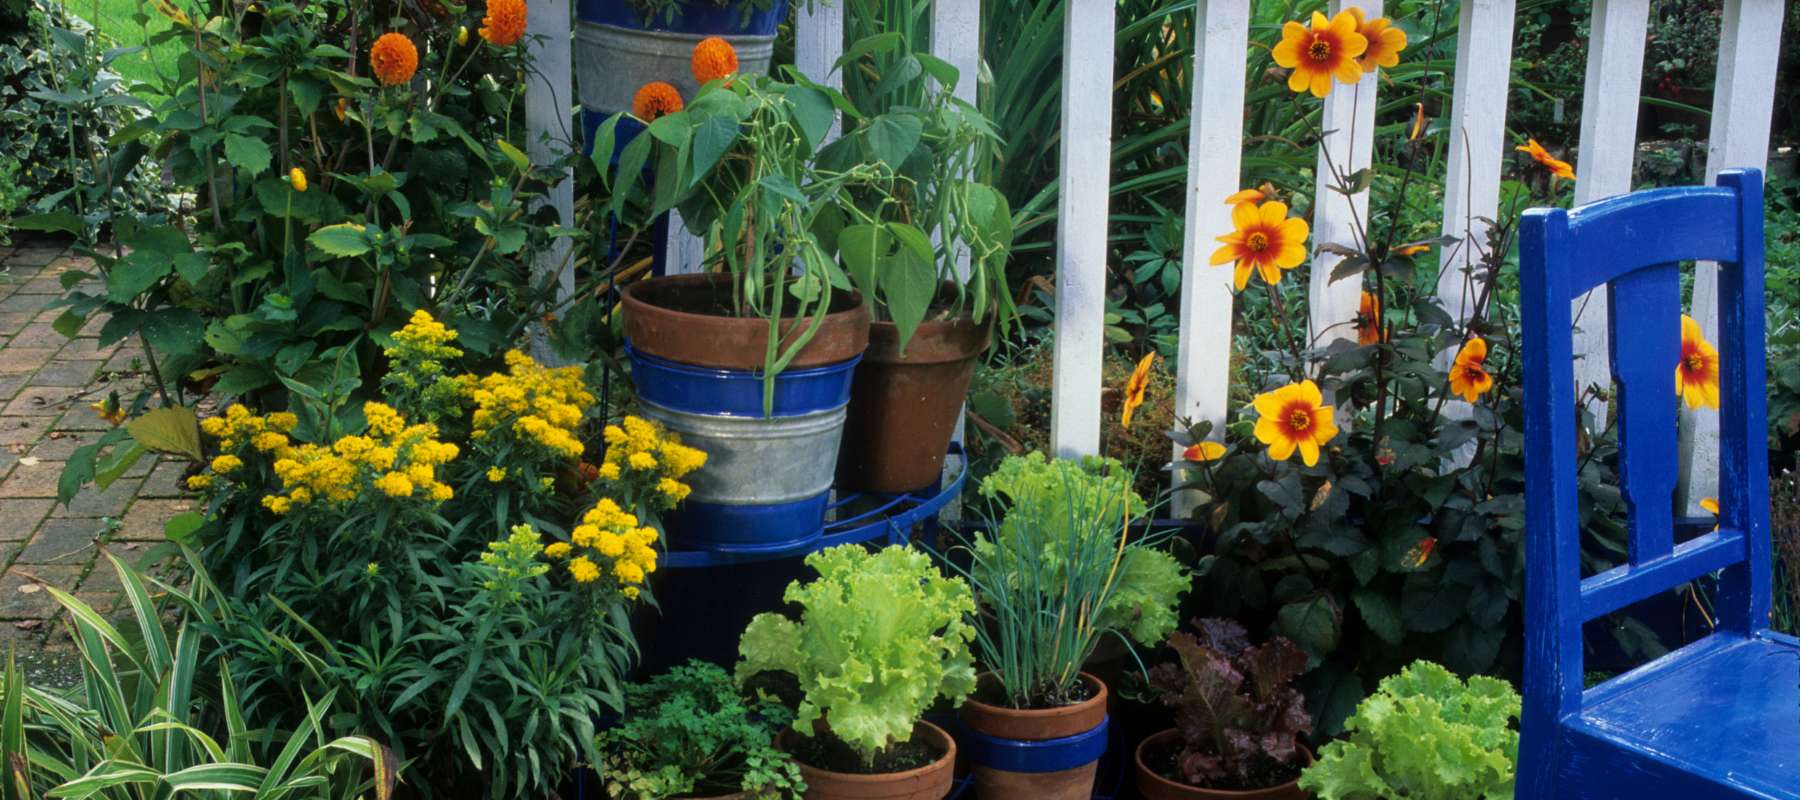 10 Easy Vegetables to Grow on Your Balcony or Patio